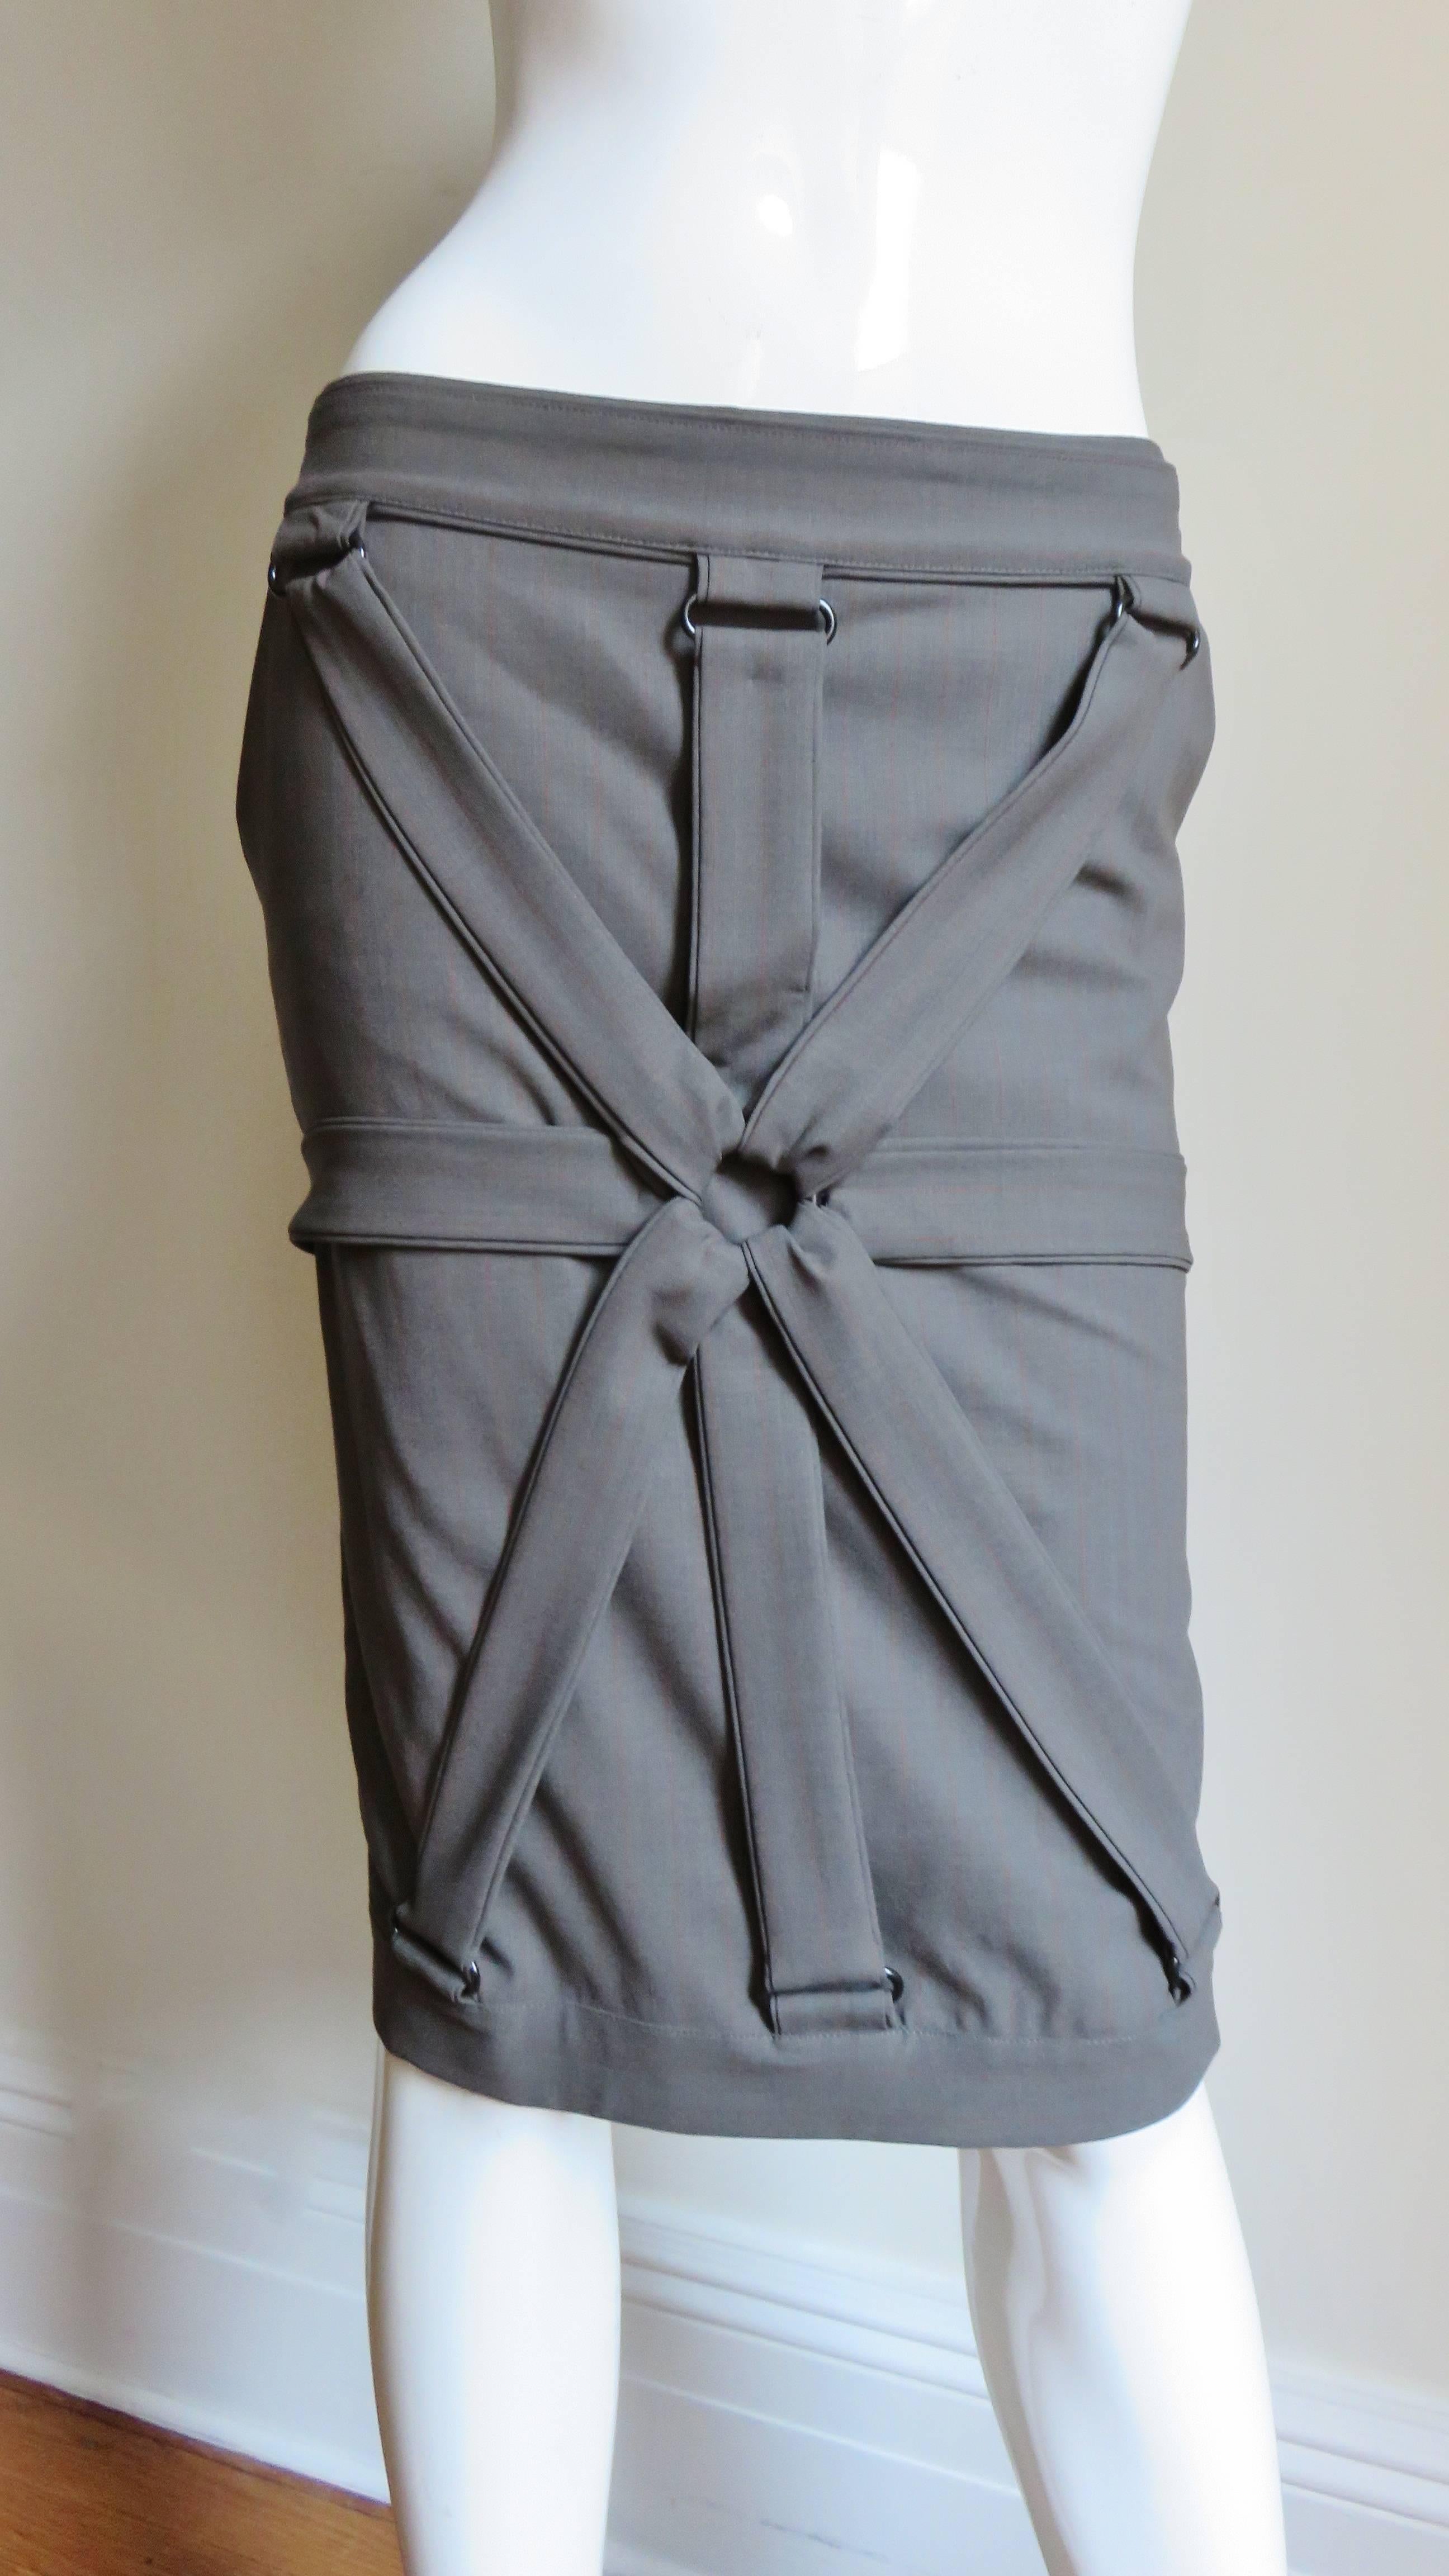 A gorgeous wool jersey skirt from Jean Paul Gaultier in khaki grey with fine subtle rust stripes. It is mid rise pencil style with a waist band, and radiating straps front and back meeting in a center ring.  It has side seam pockets and is fully